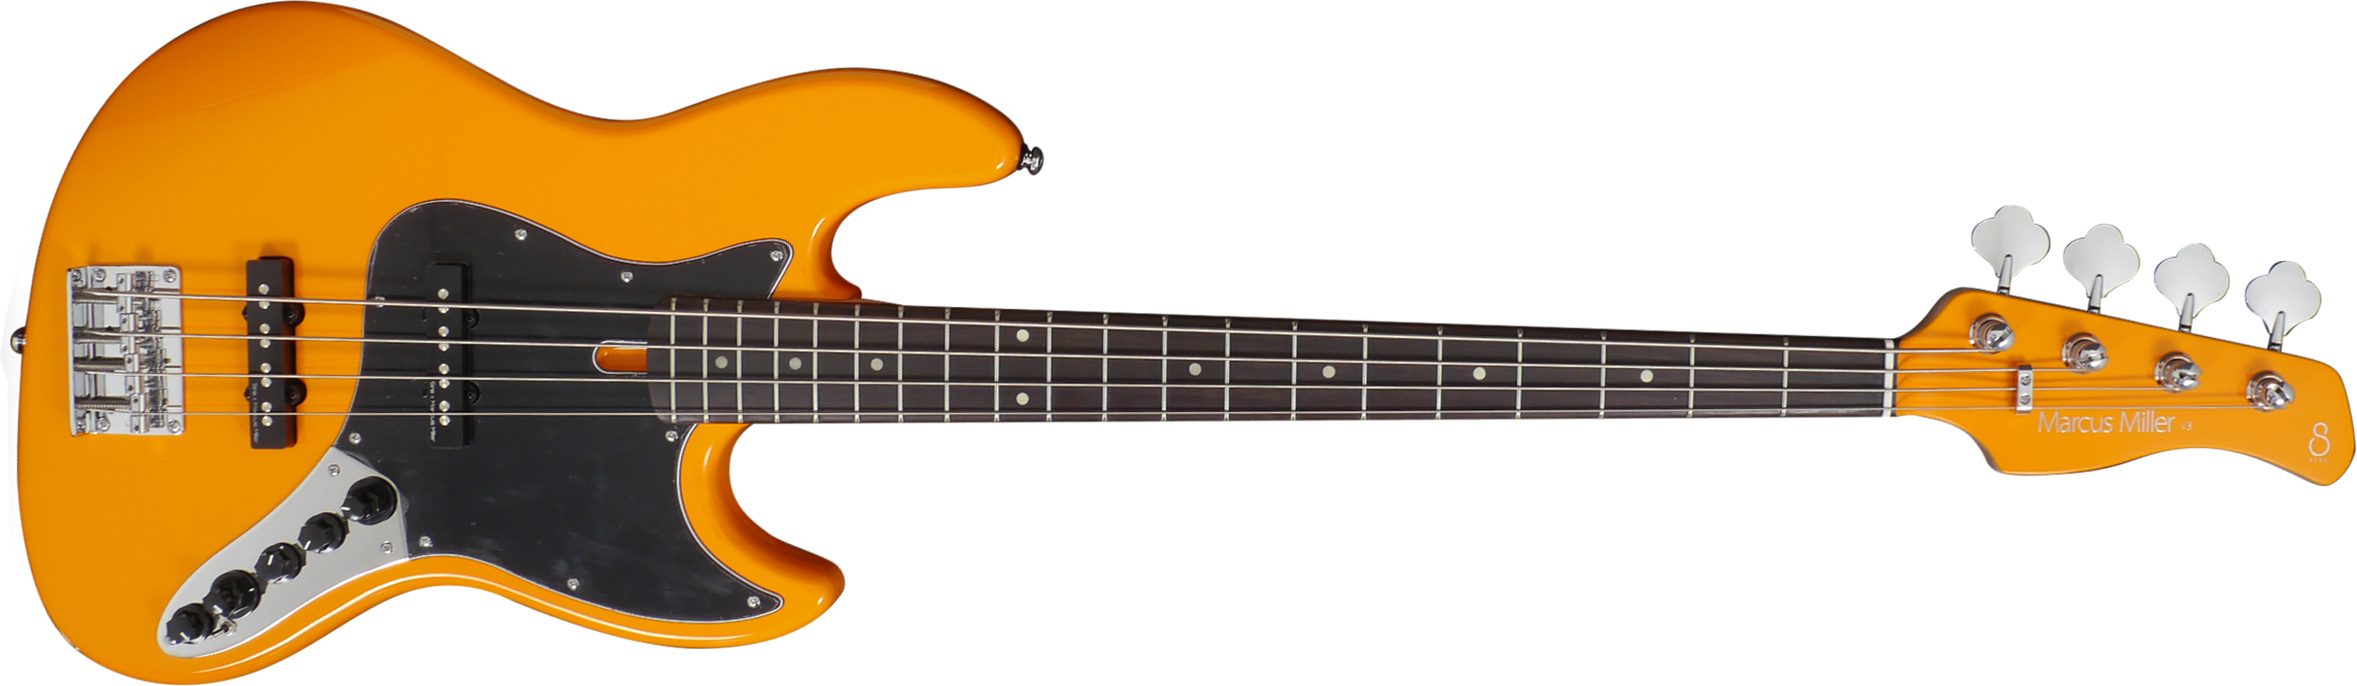 Marcus Miller V3 4st 2nd Generation Active Rw Sans Housse - Orange - Solidbody E-bass - Main picture